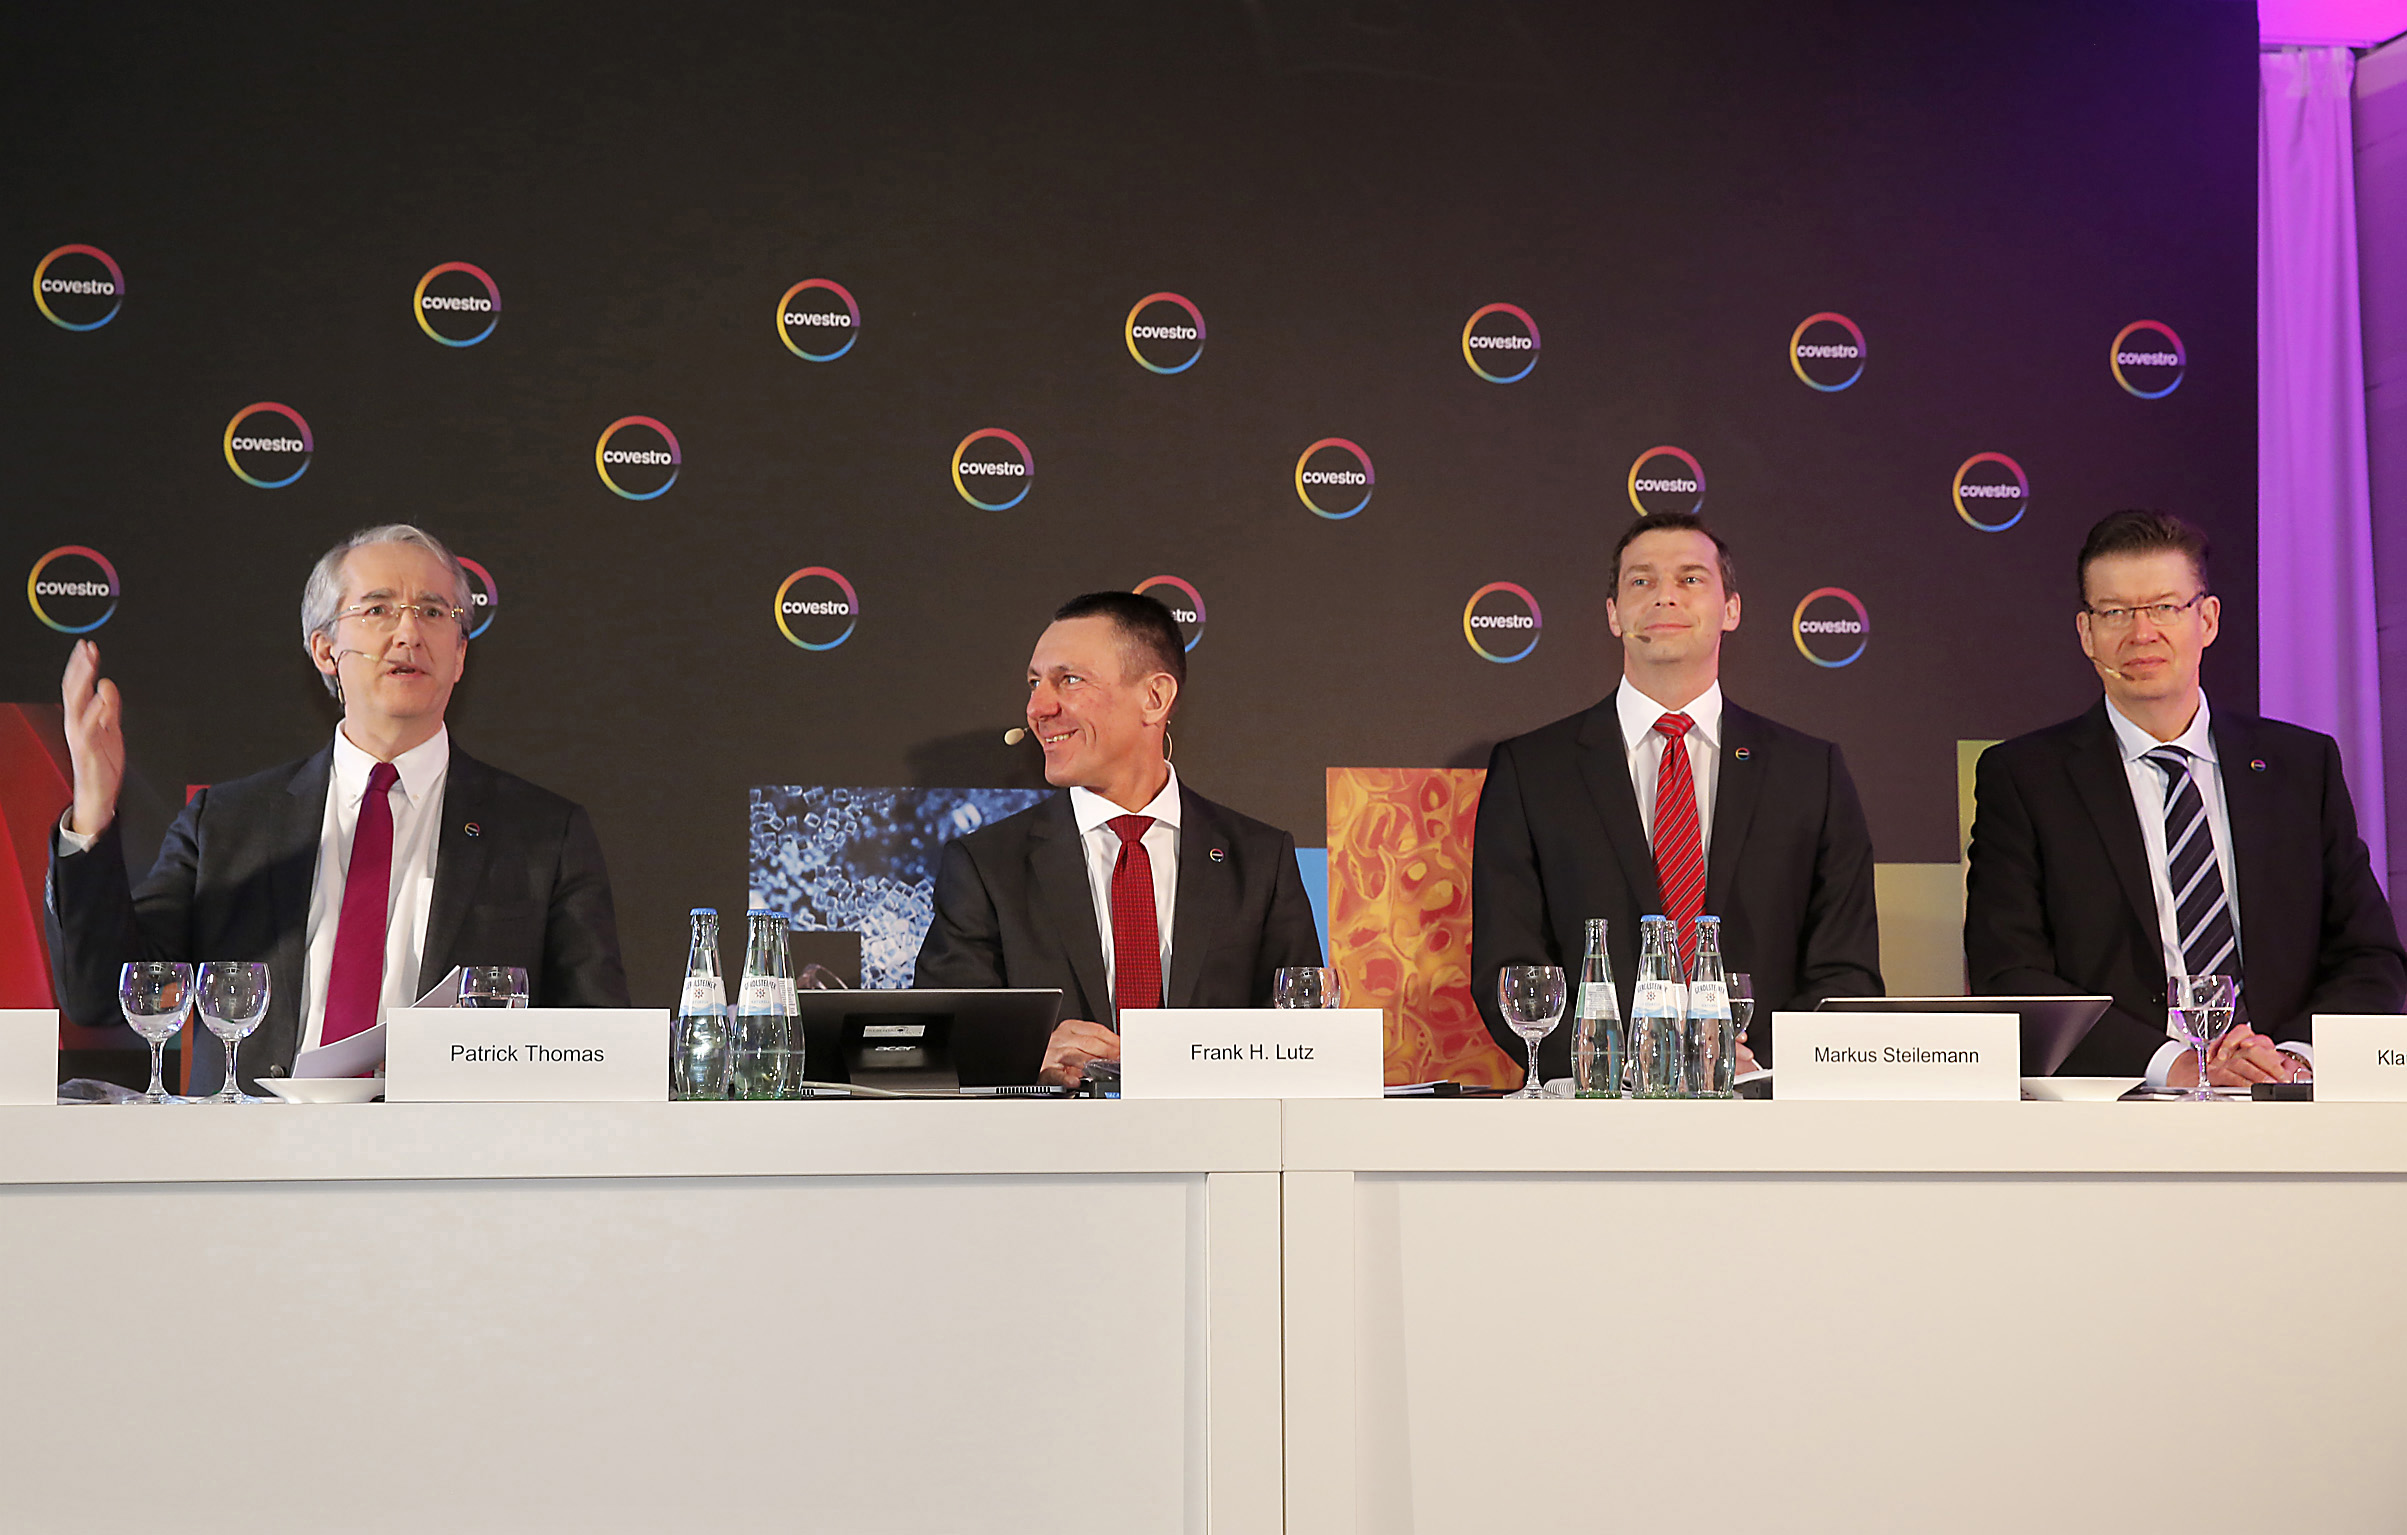 From Left To Right Patrick Thomas Ceo Of Covestro Frank H Lutz Cfo Of Covestro Markus Steilemann Head Of Innovation At Covestro Klaus Schafer Head Of Industrial Operations At Covestro Covestro Large Image Download Pr Newswire